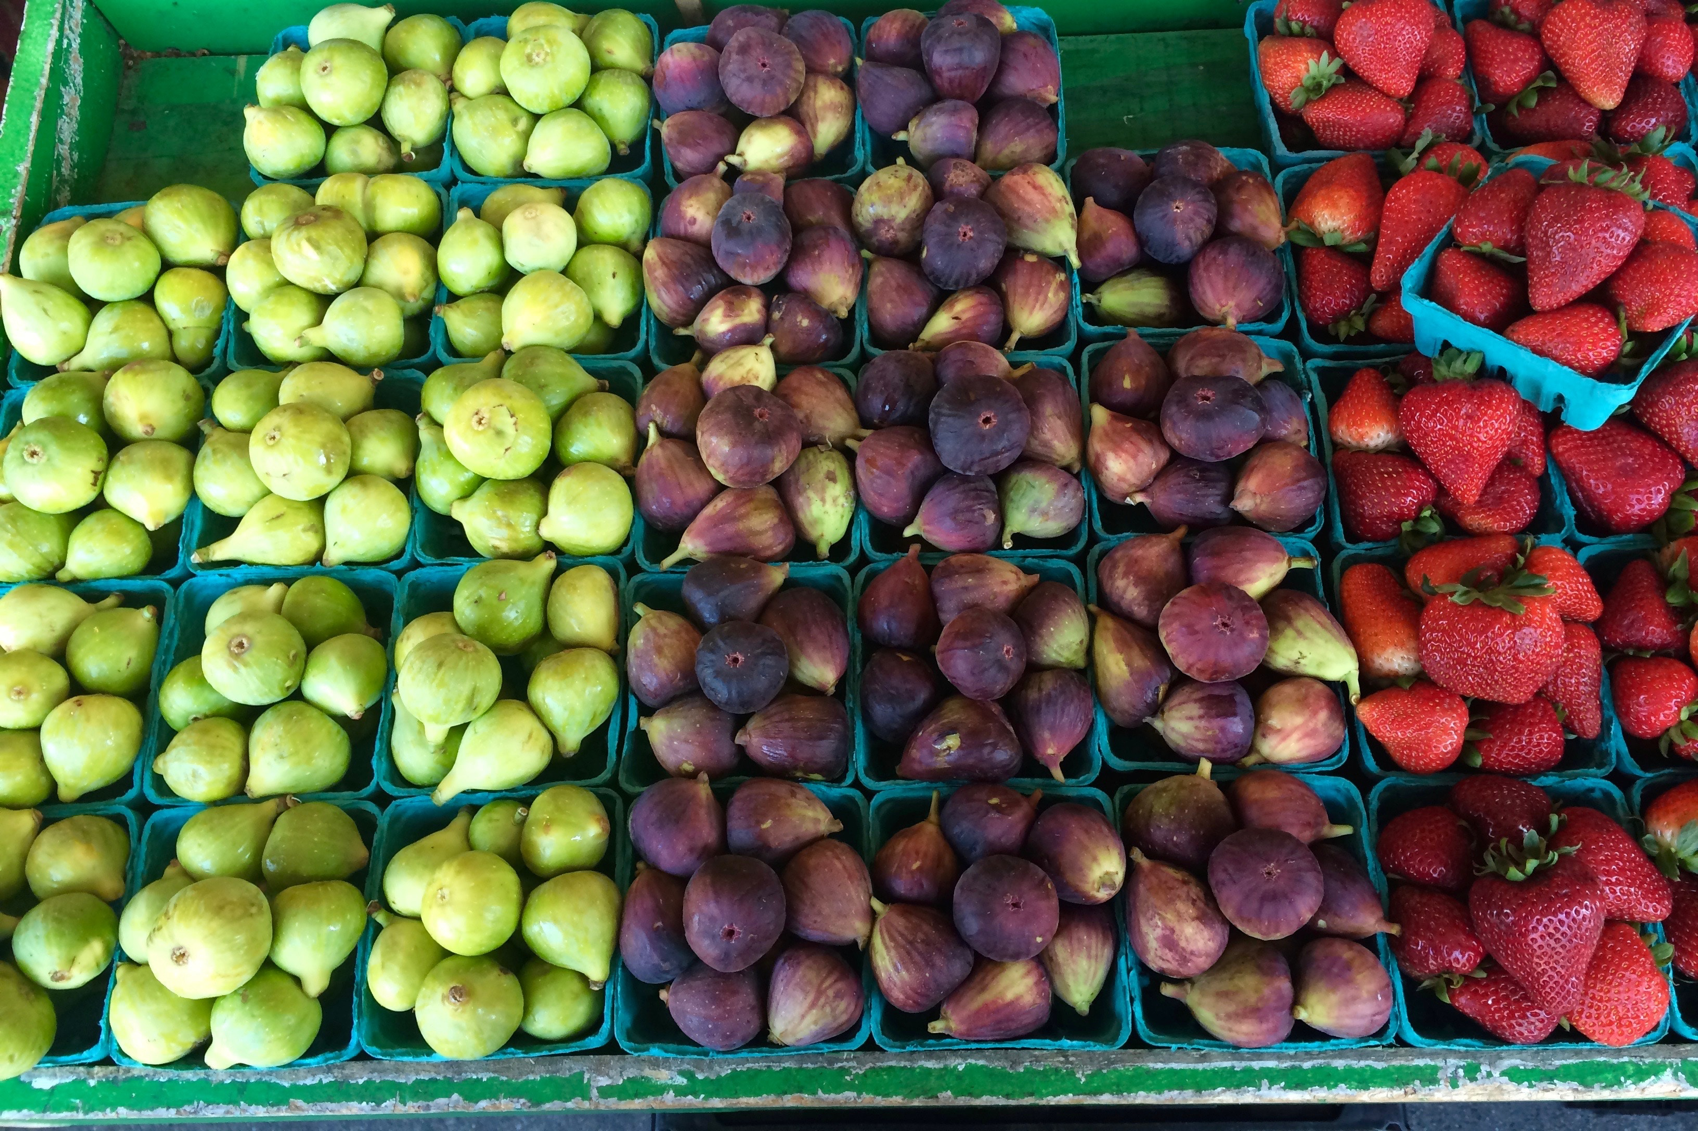 Visit the Farmers Markets